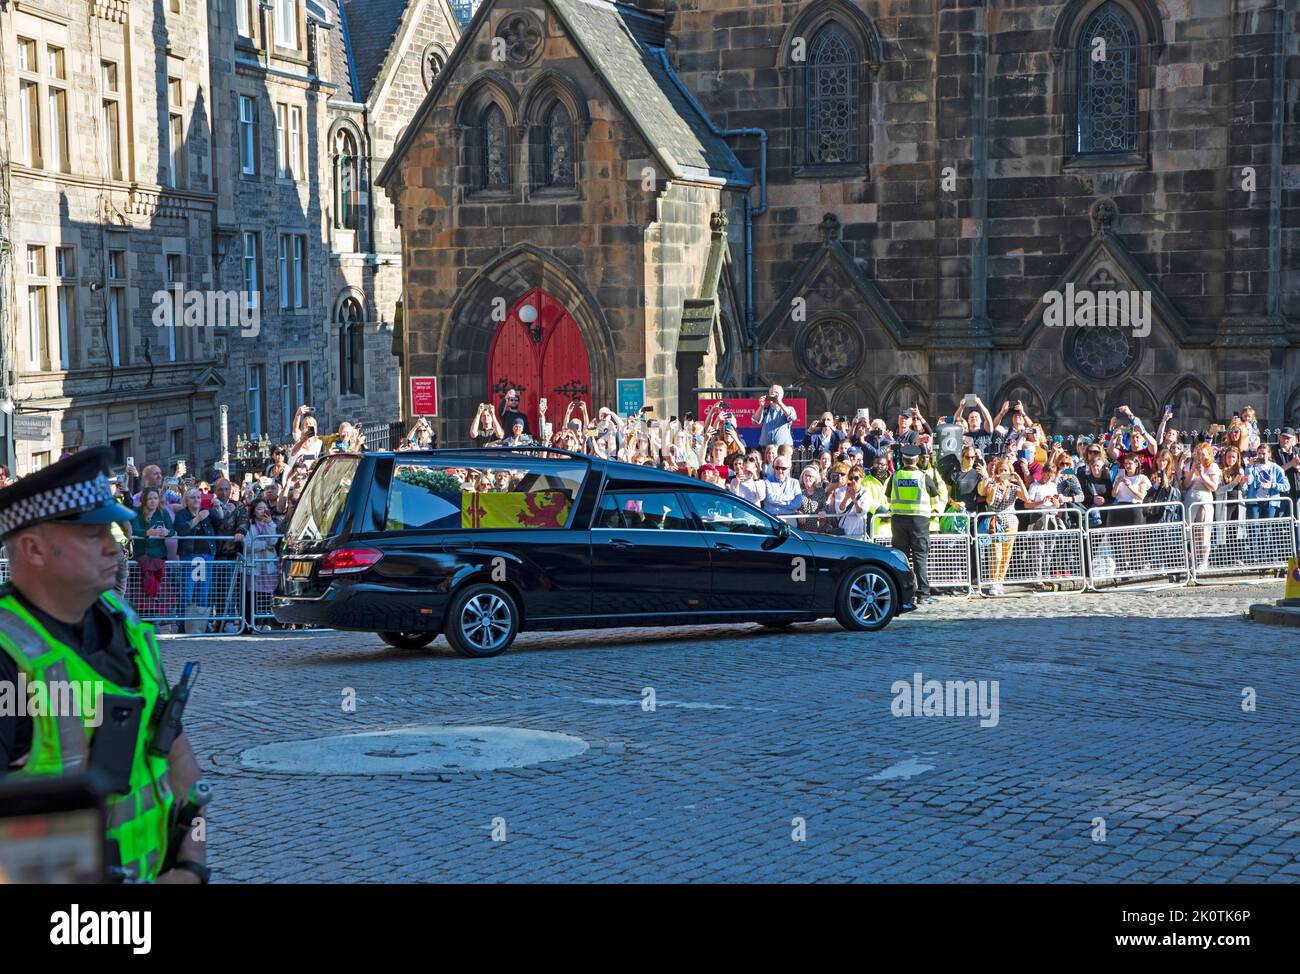 Her Majesty Queen Elizabeth II, coffin leaving Royal Mile at Lawnmarket, Castlehill, for the final time, Edinburgh, Scotland, UK. As crowds gather to view Her Majesty Queen Elizabeth II coffin departing St Giles Cathedral.13th September 2022. Credit: Arch White/alamy live news. Stock Photo